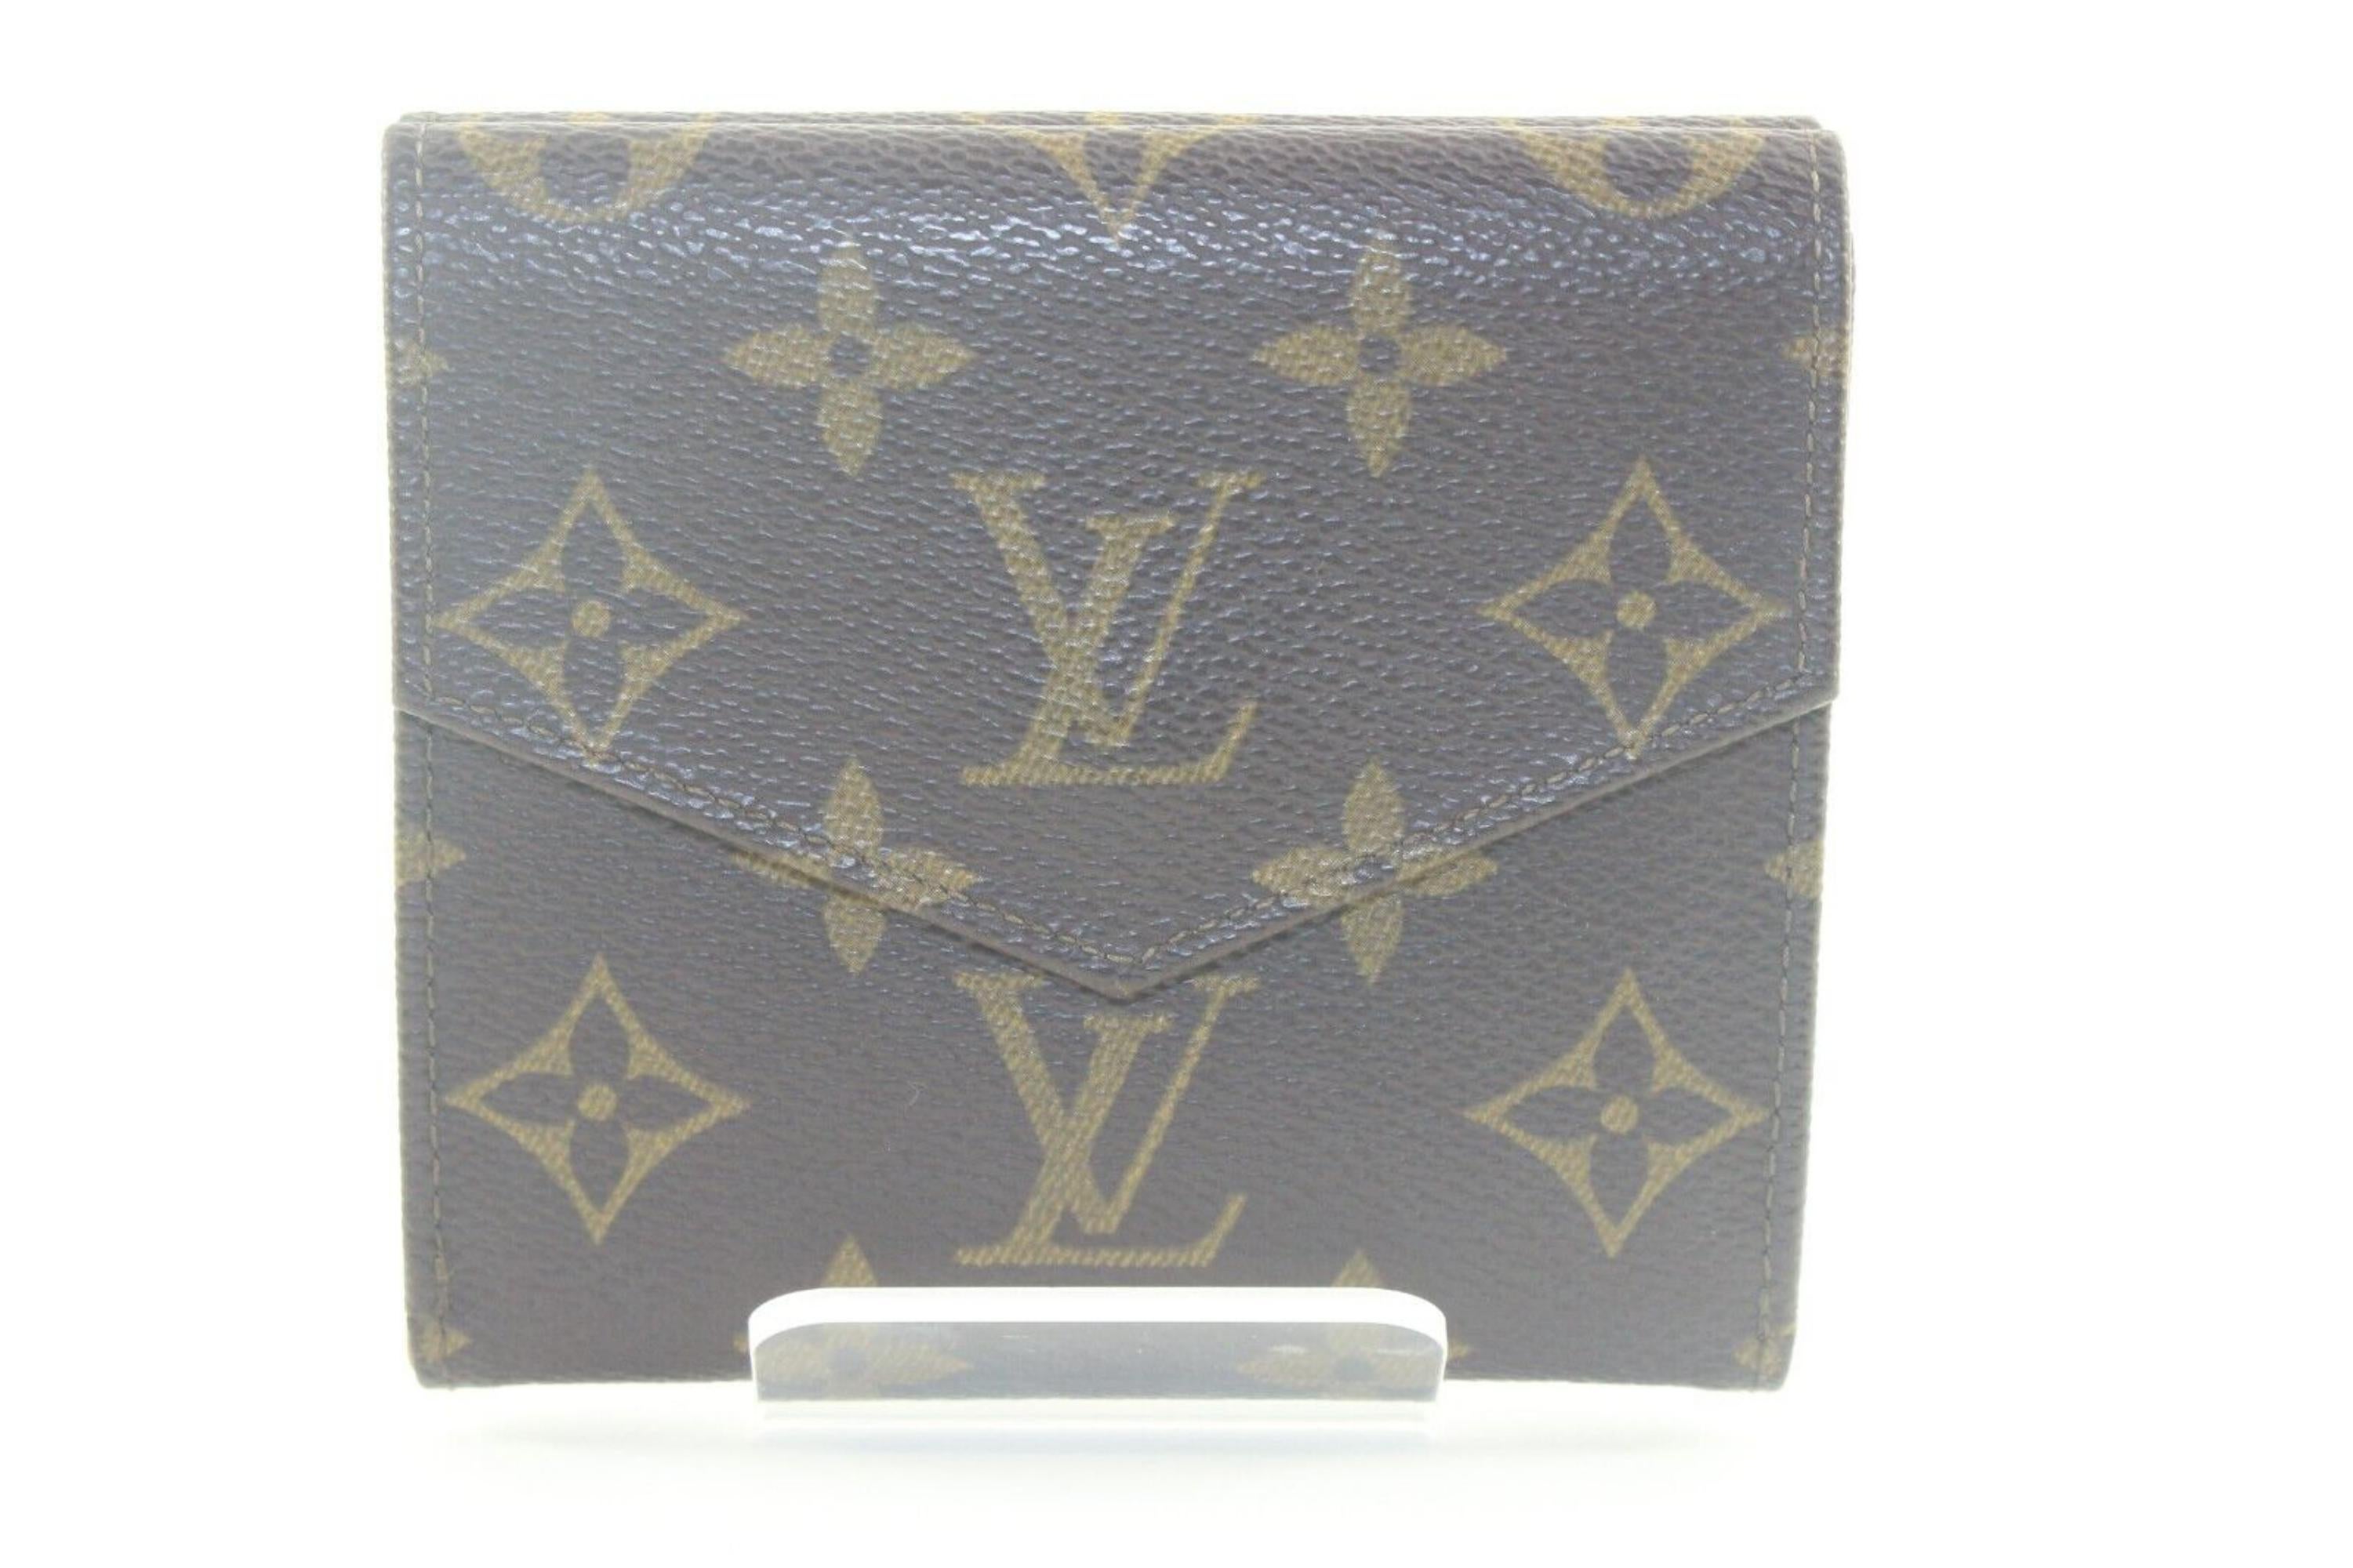 Authentic Louis Vuitton Victorine Monogram Compact Wallet 3LV1130K In Fair Condition In Dix hills, NY